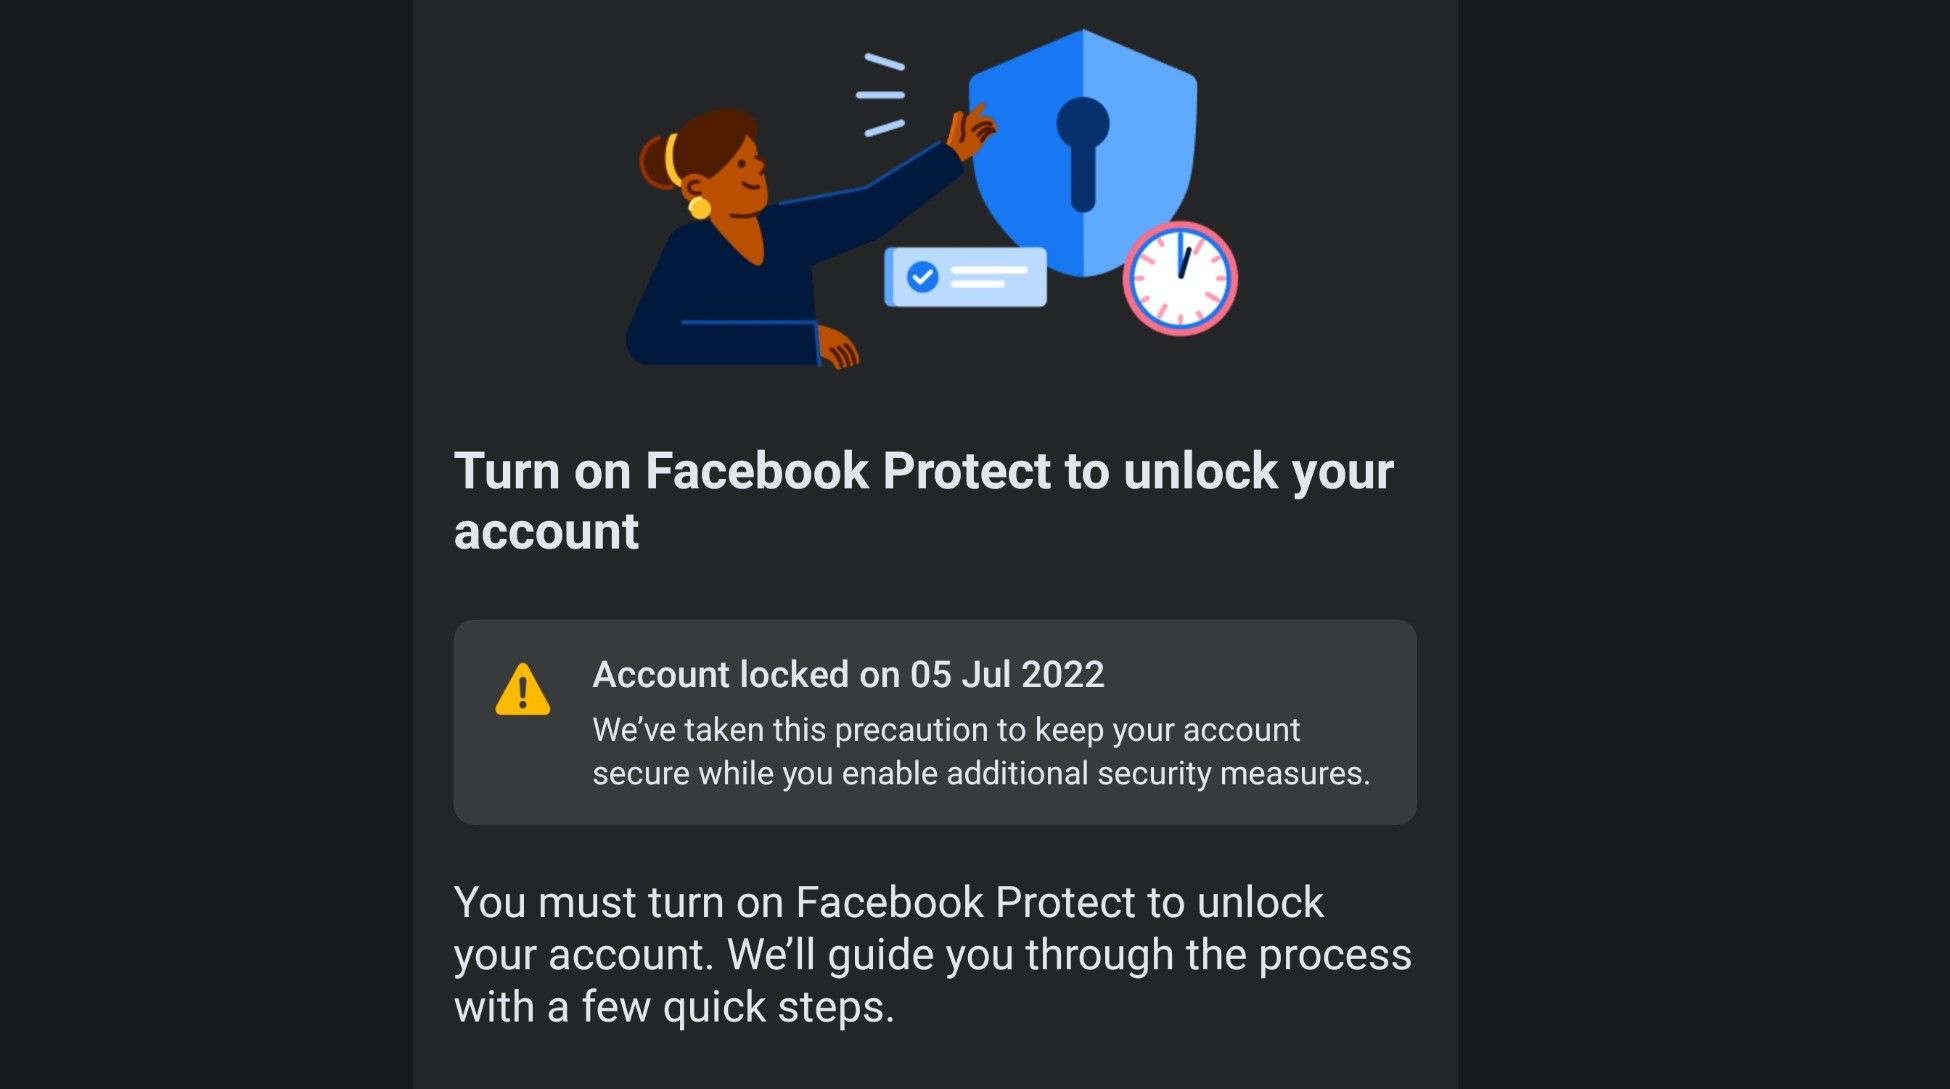 Facebook Notification That User's Account Has Been Temporarily Locked